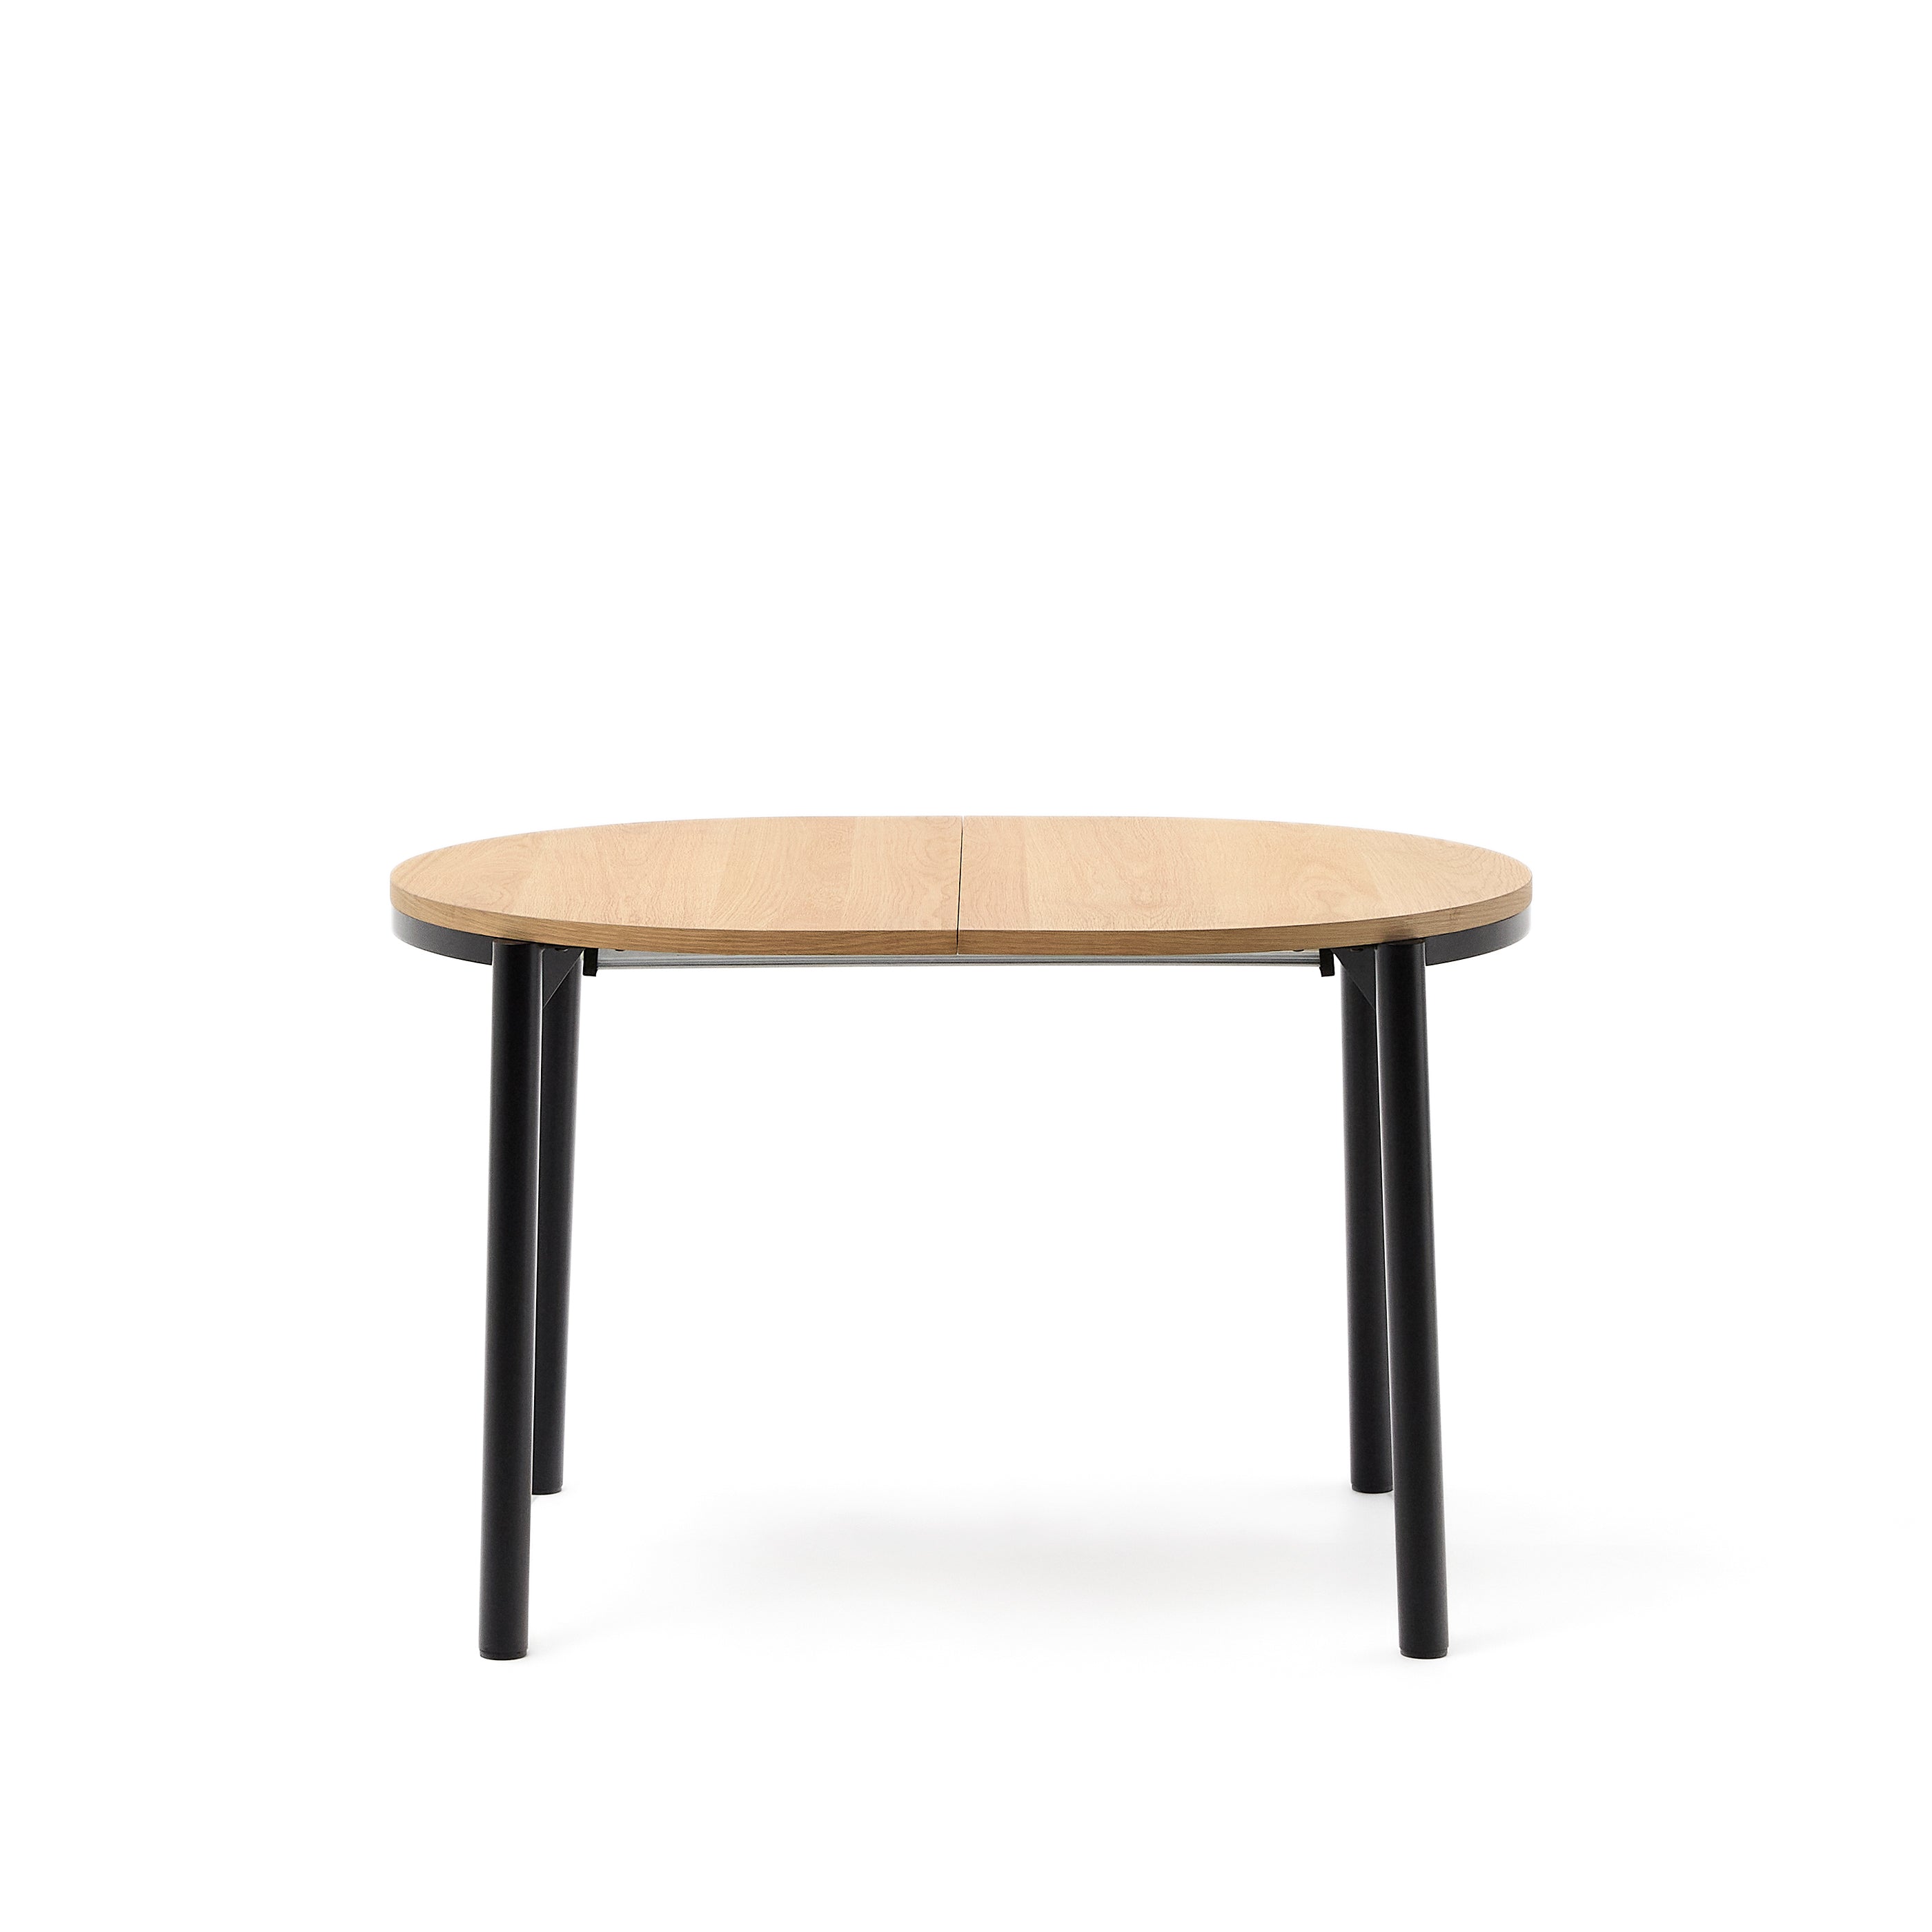 Montuiri round extendable table with oak veneer and black finished steel legs, Ø120(160) x 90 cm